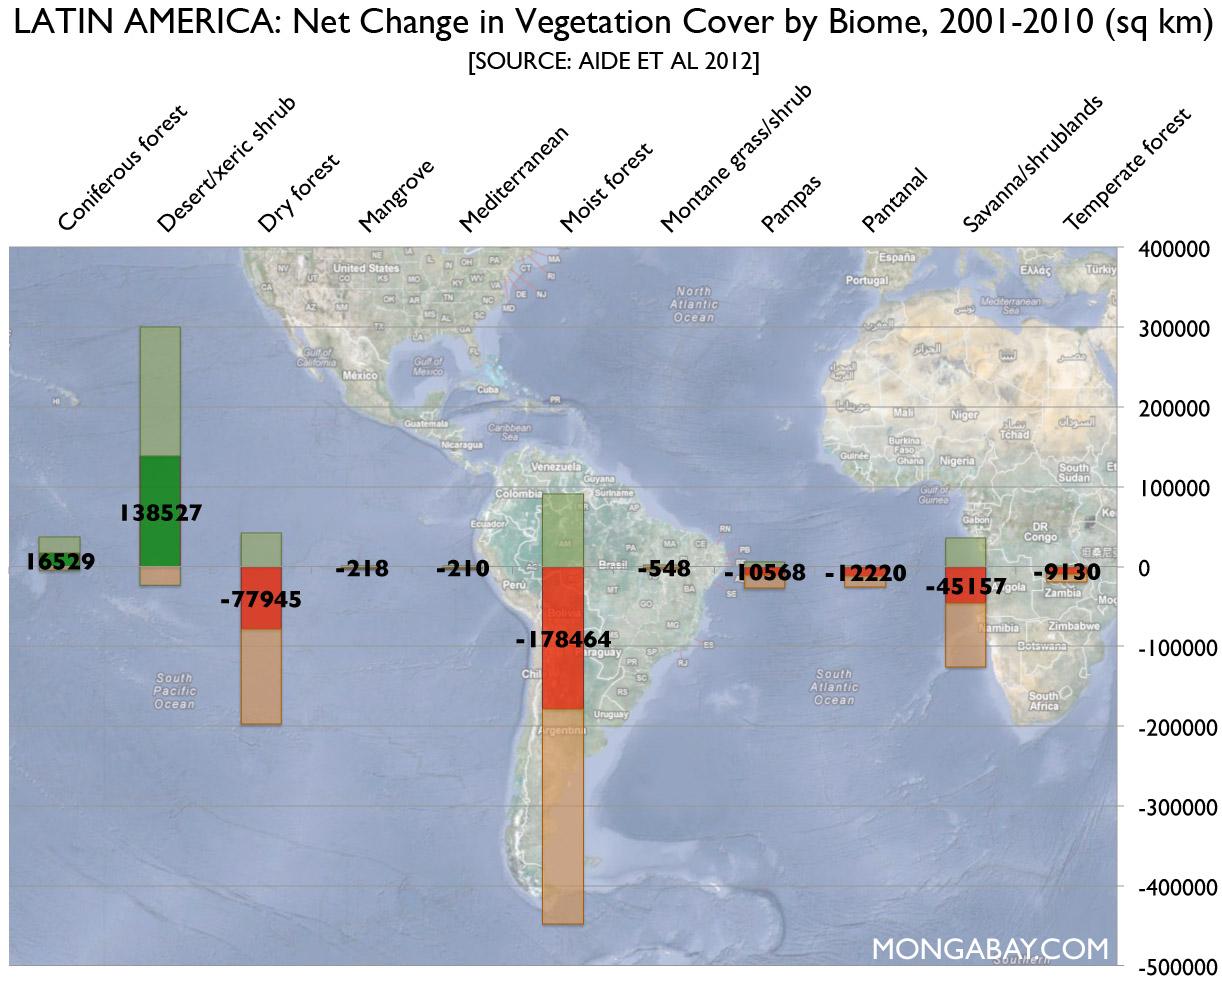 Change in vegetation cover by biome across Latin America, 2001-2010.